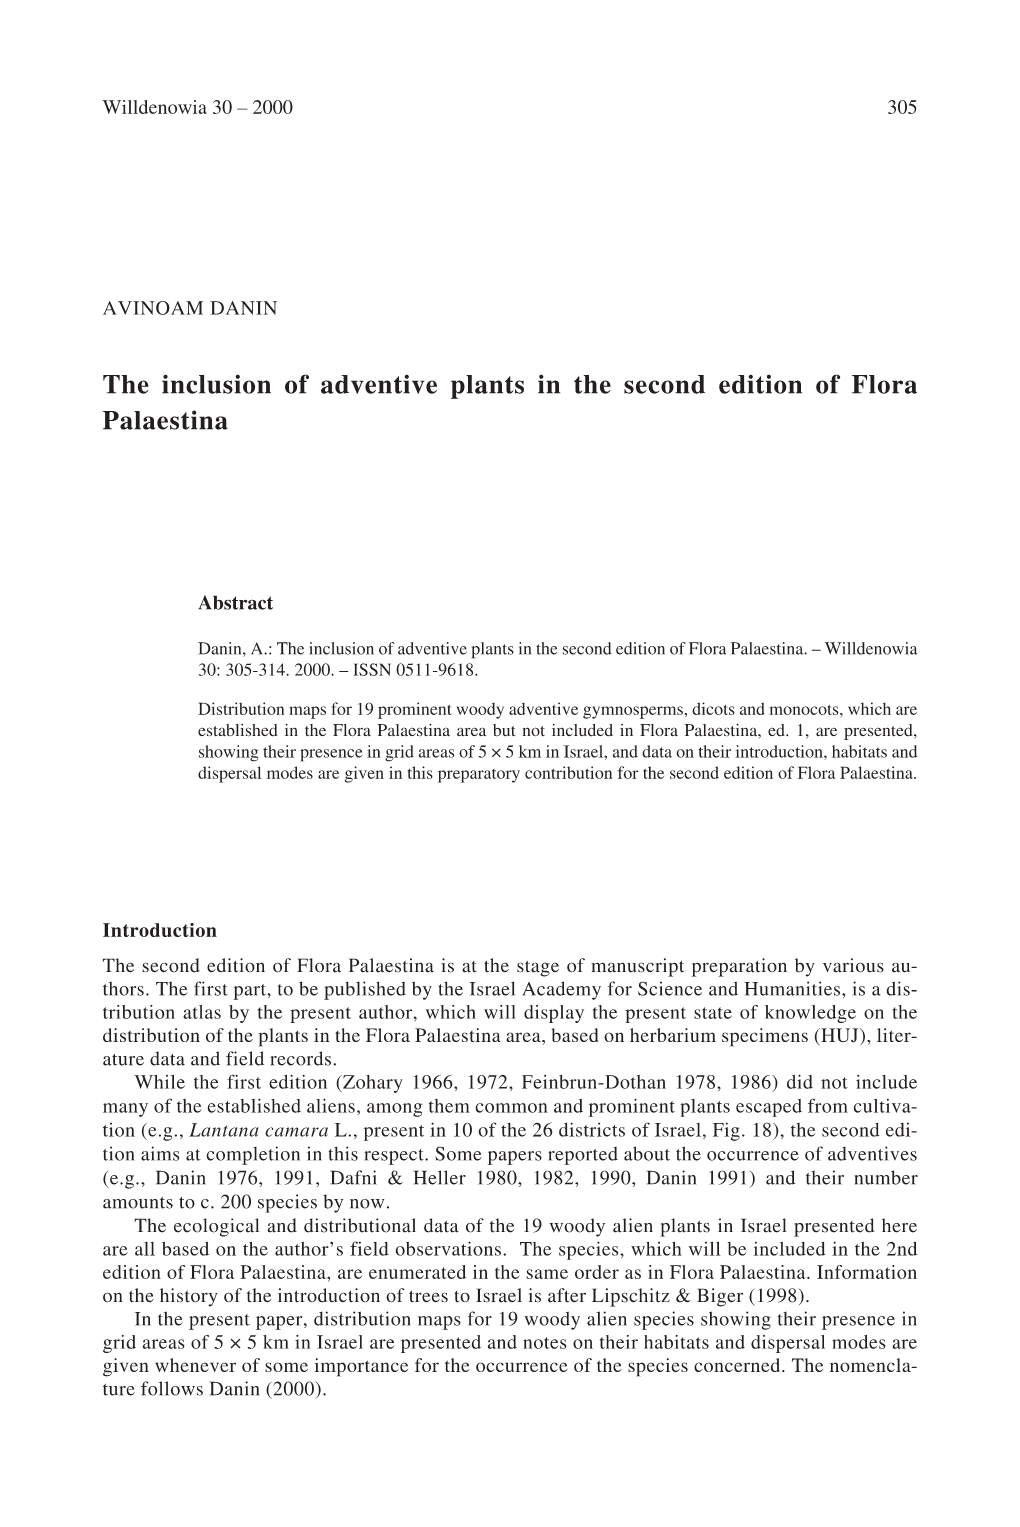 The Inclusion of Adventive Plants in the Second Edition of Flora Palaestina